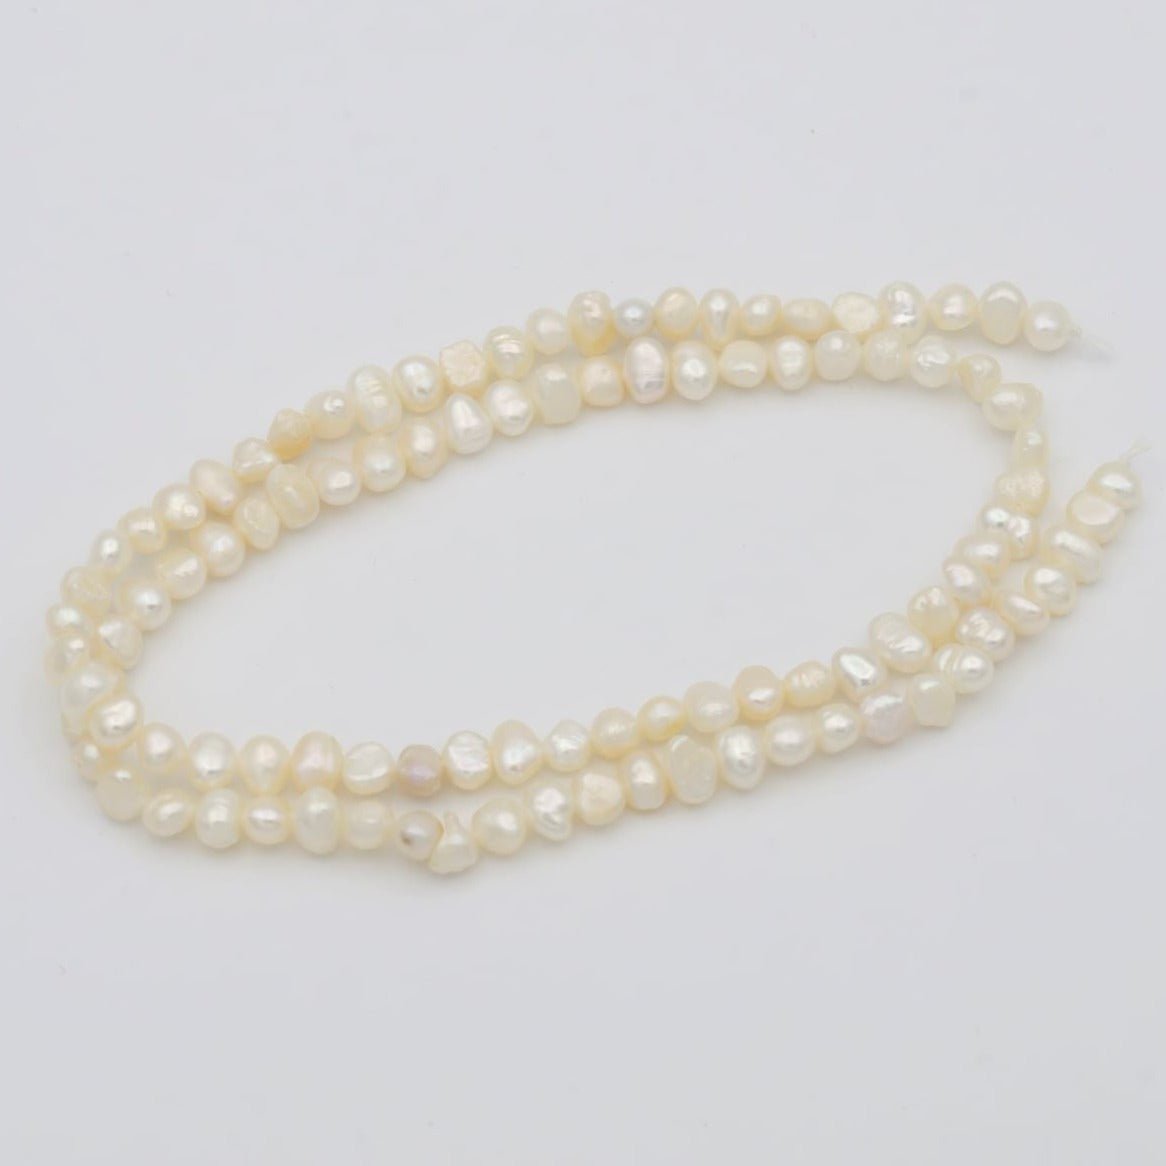 3.4-5.8mm AAA Tiny Seed Natural White Potato Freshwater Pearl Beads Genuine Tiny Freshwater Pearl Beads | WA-815 Clearance Pricing - DLUXCA